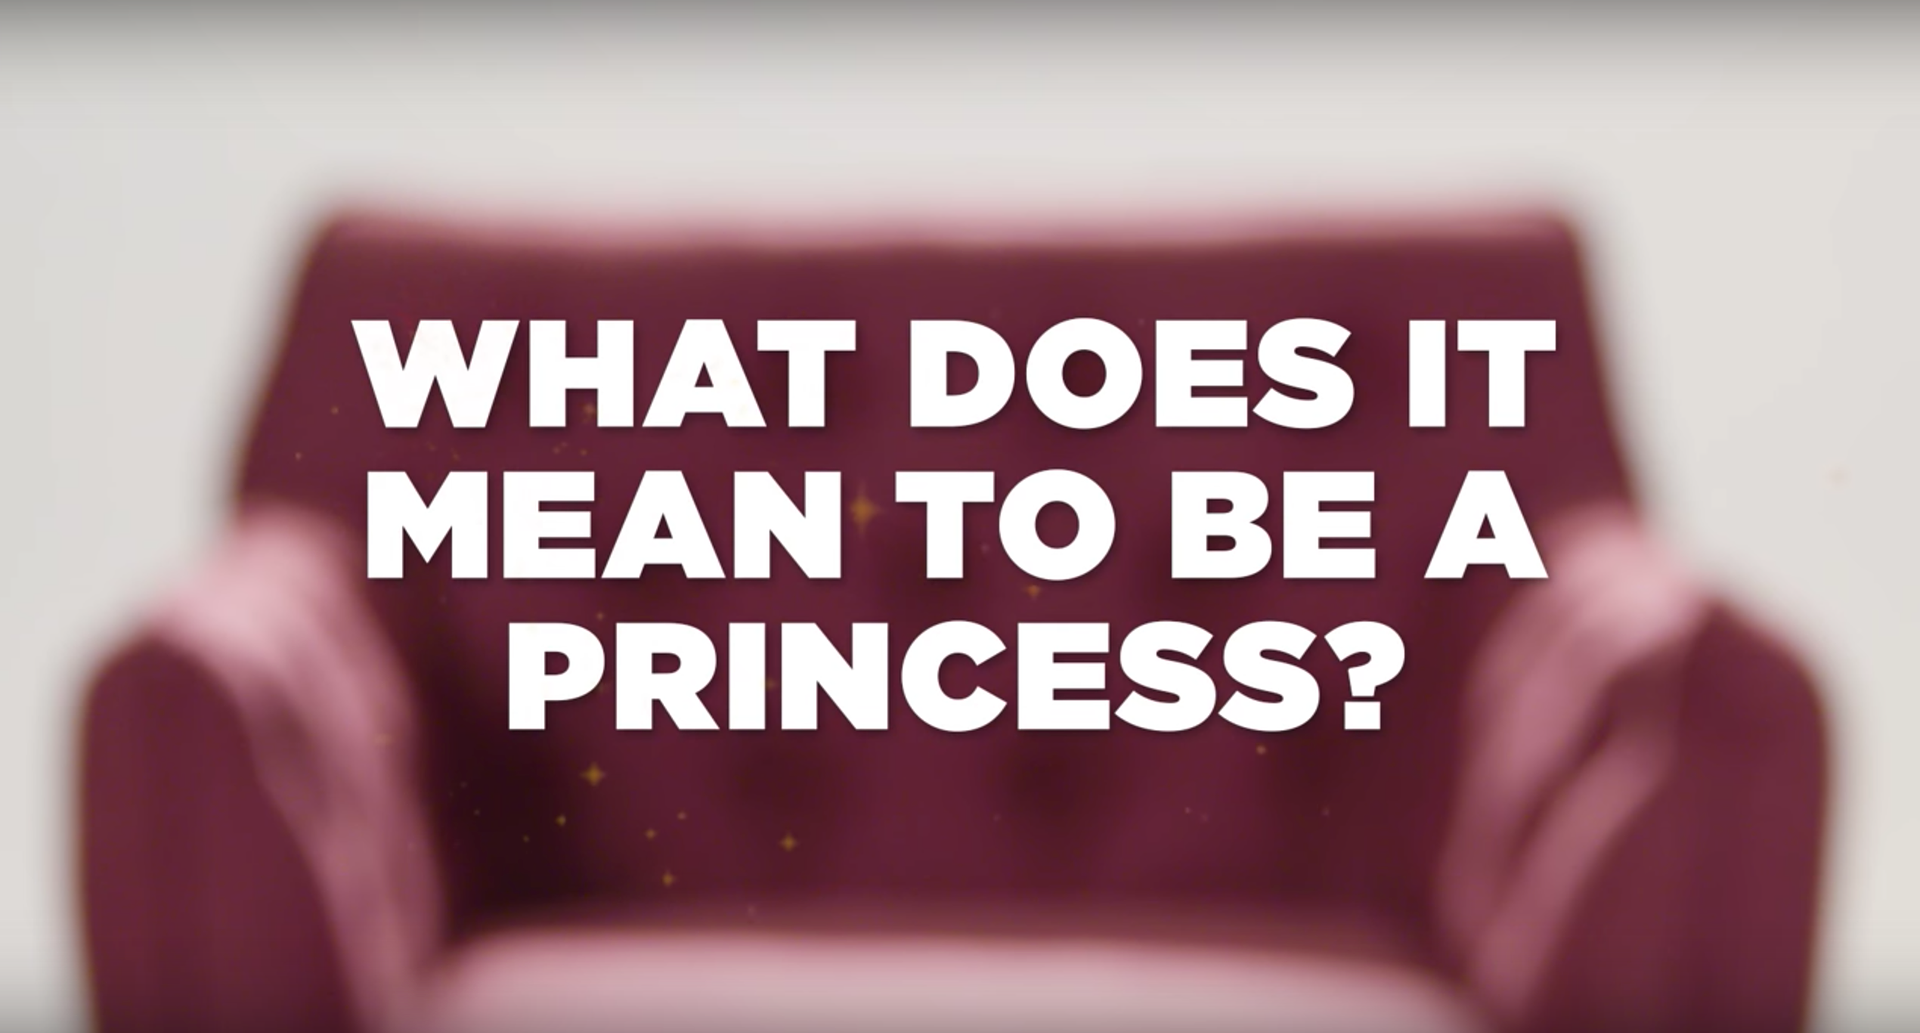 What does it mean to be a princess? Tell Dynacraft and win your own Disney princess carriage ride-on toy! | sponsored